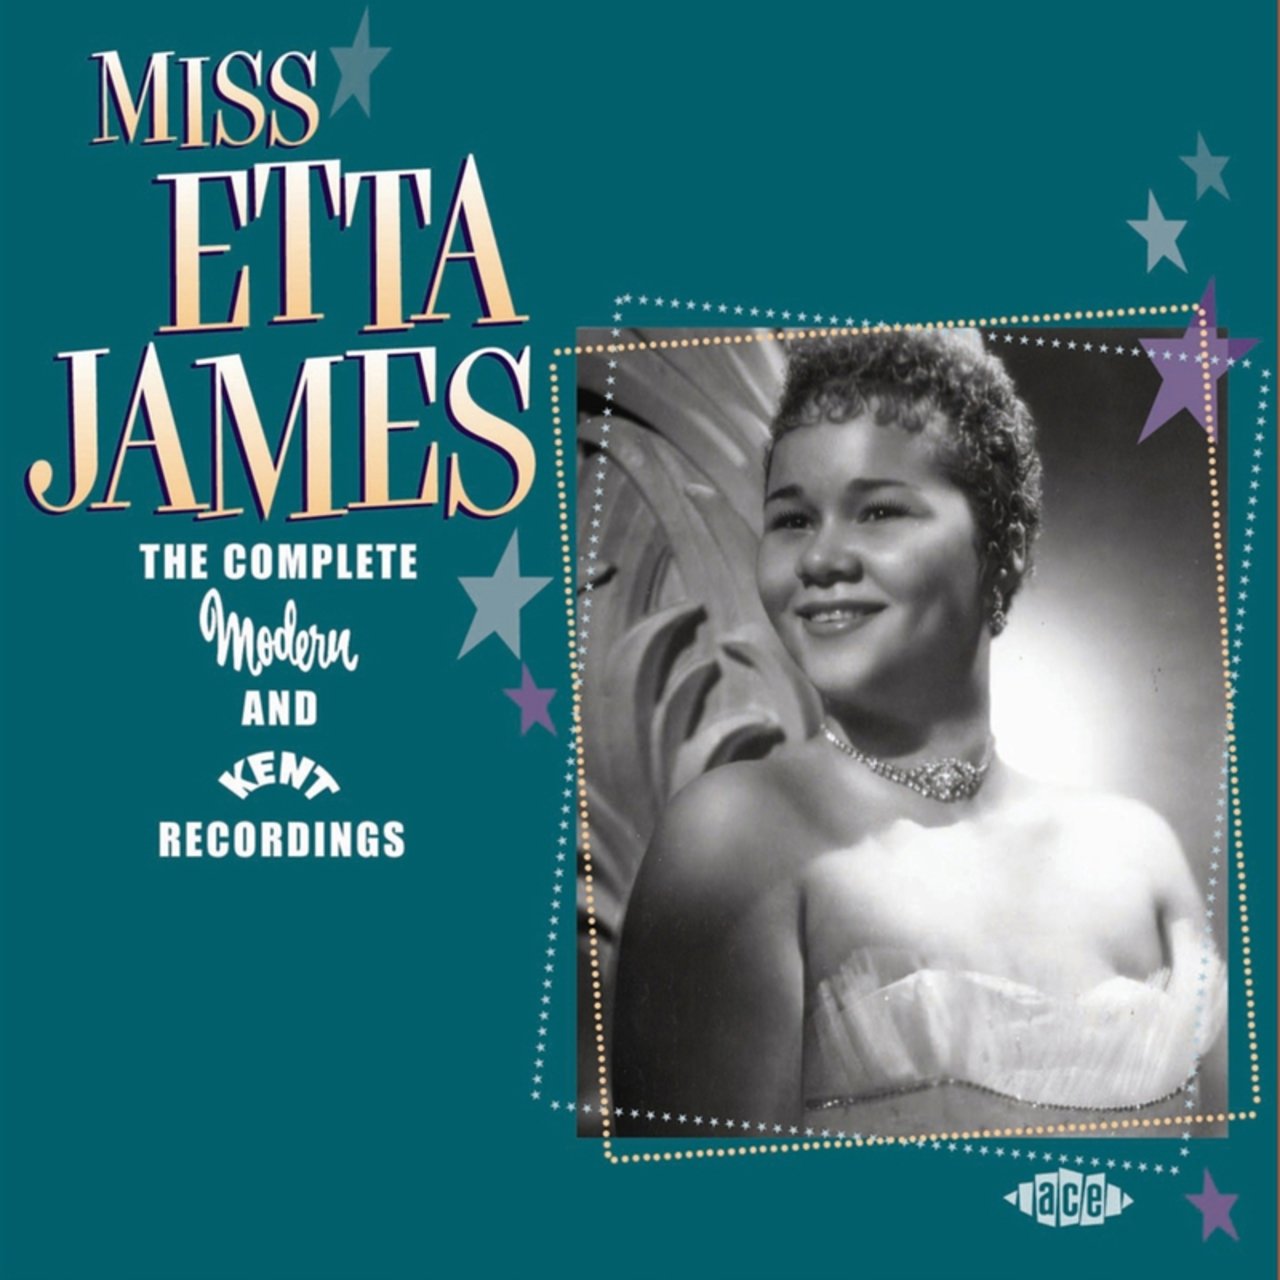 Miss Etta James- The Complete Modern and Kent Reco [2005]